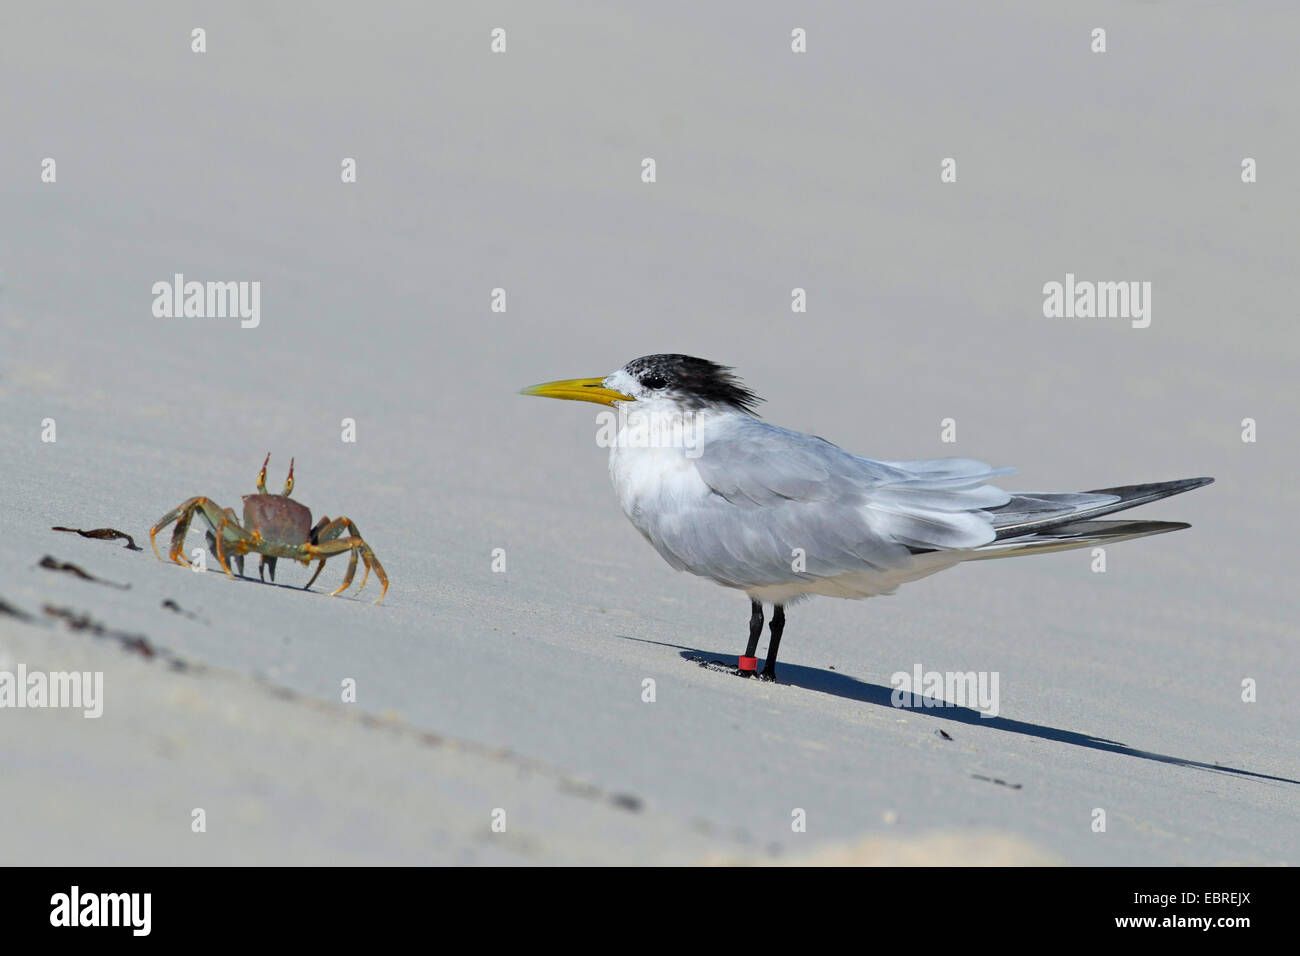 greater crested tern (Thalasseus bergii, Sterna bergii), standing at the shore with a spider crab, Seychelles, Bird Island Stock Photo